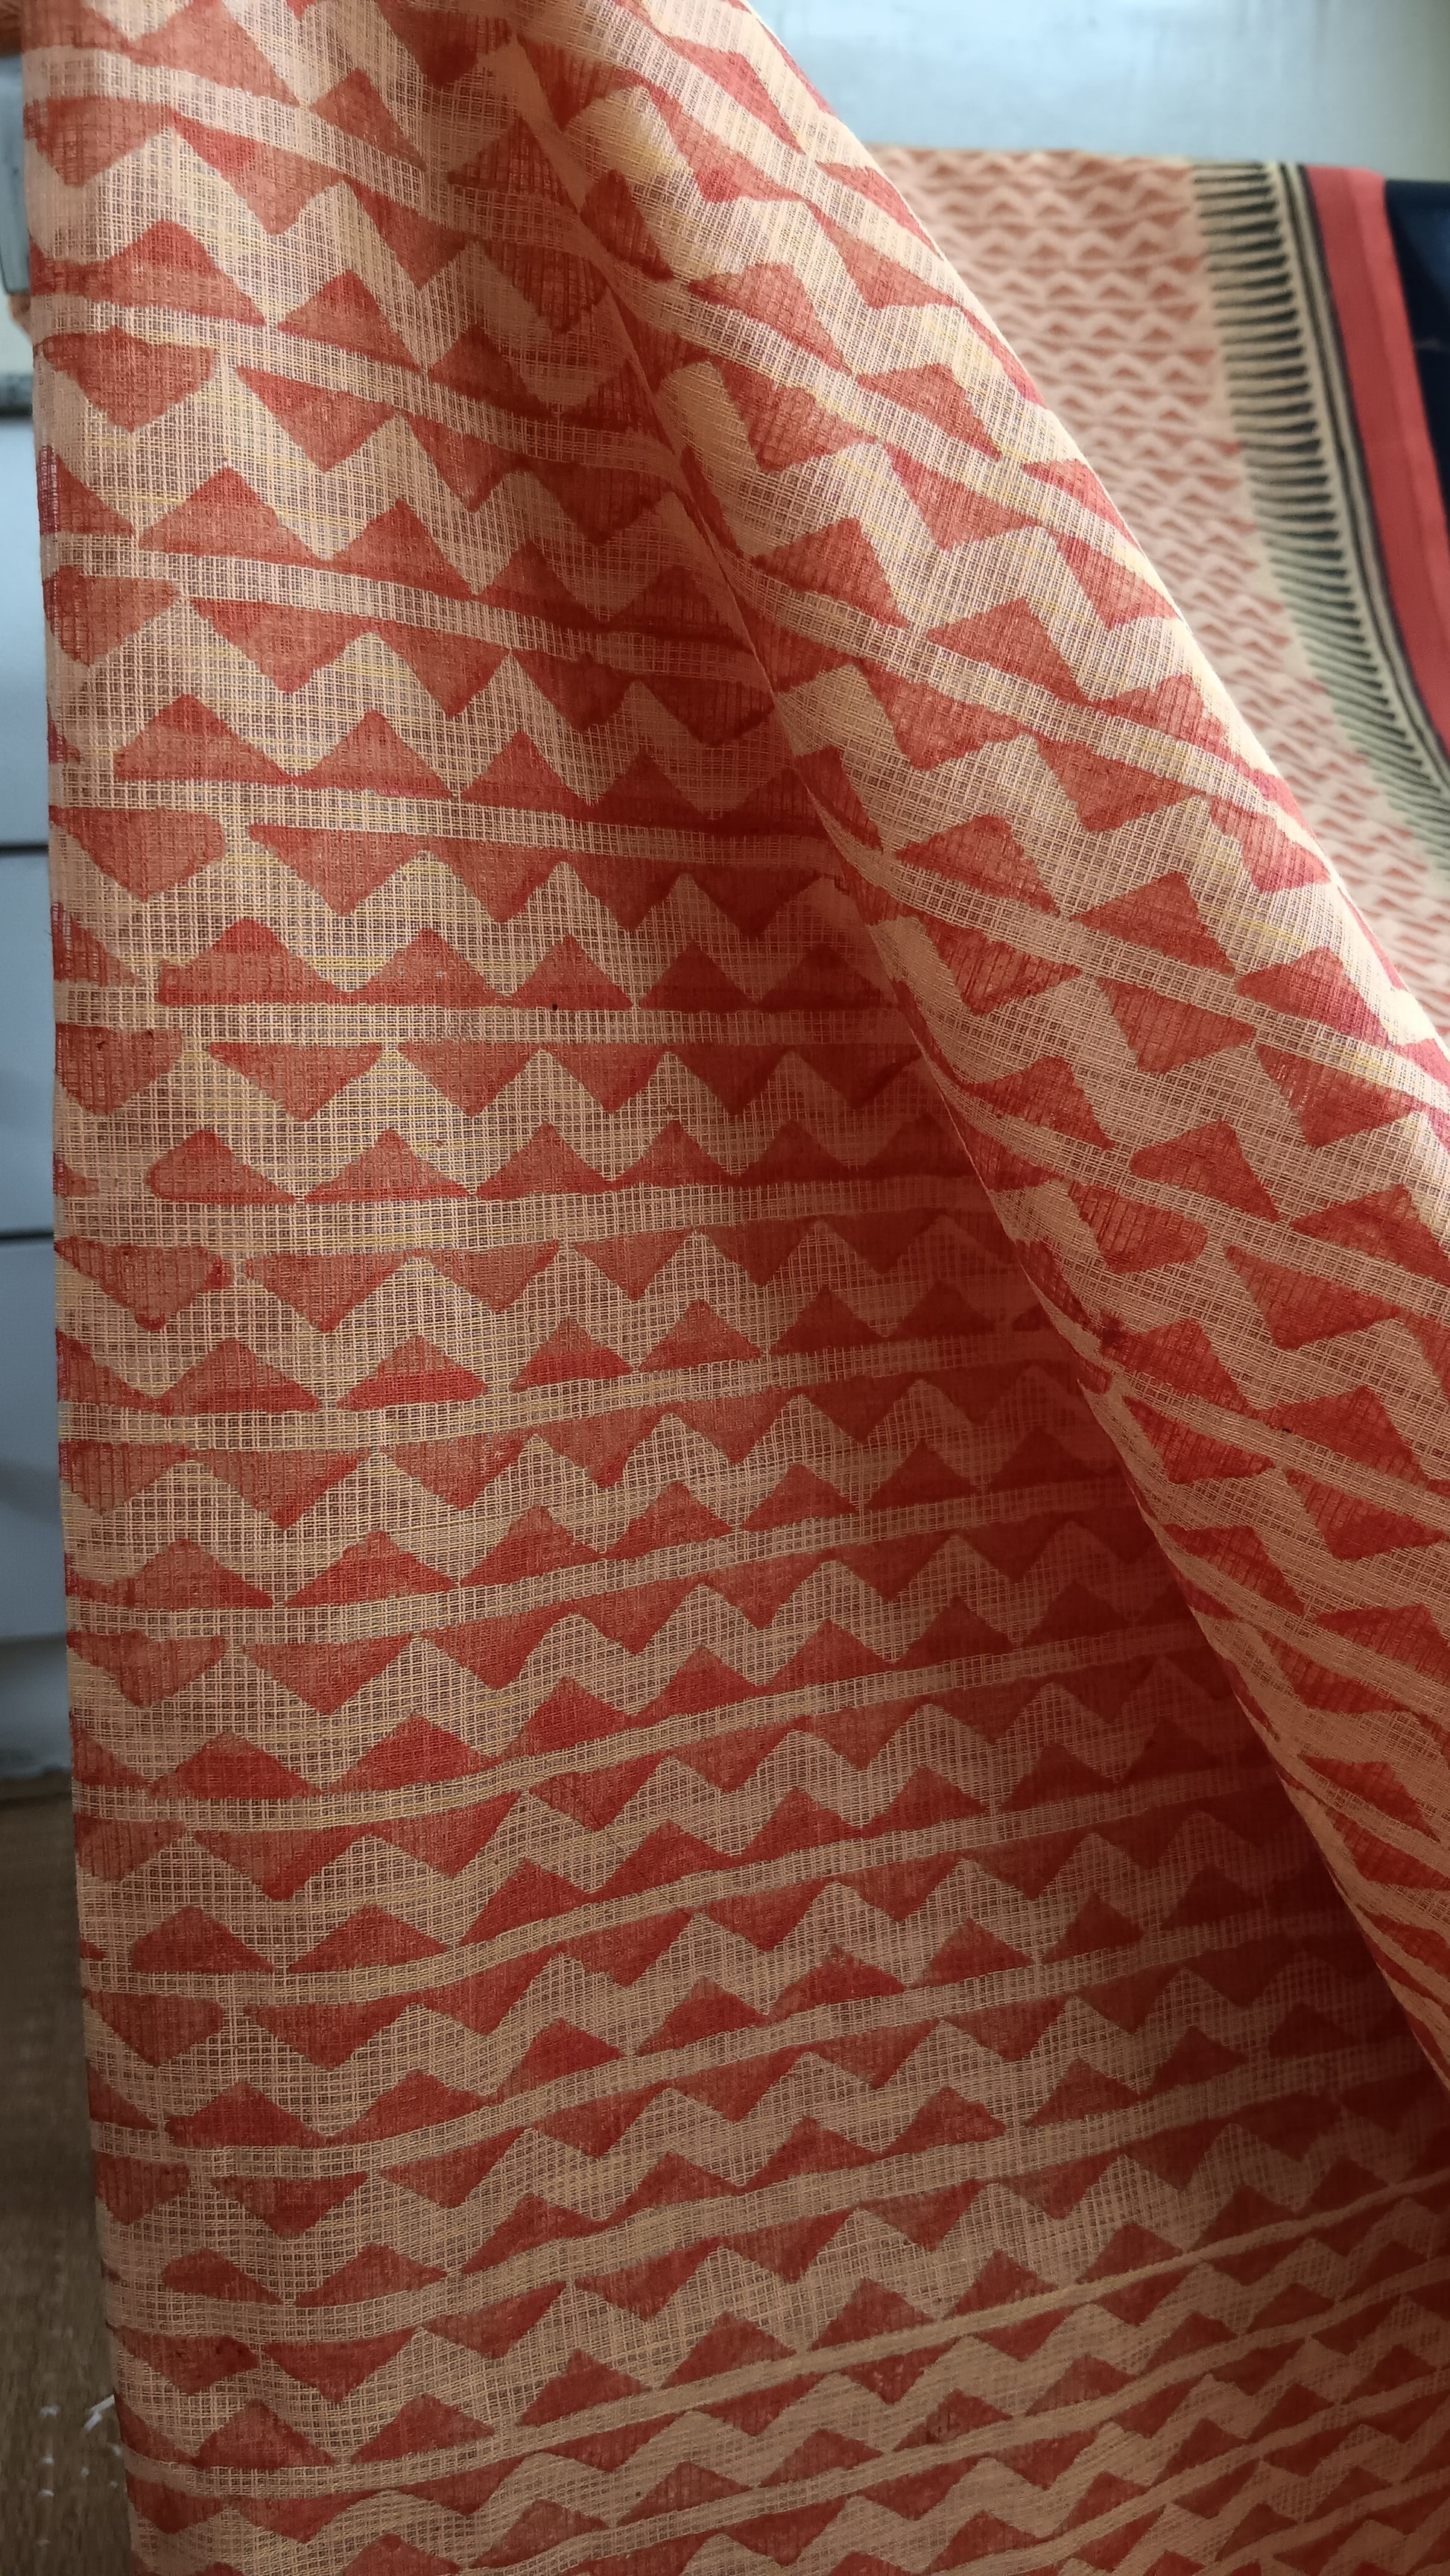 Close up view of the bold geometric pattern block printed on the body of a light weight kota cotton saree for daily use